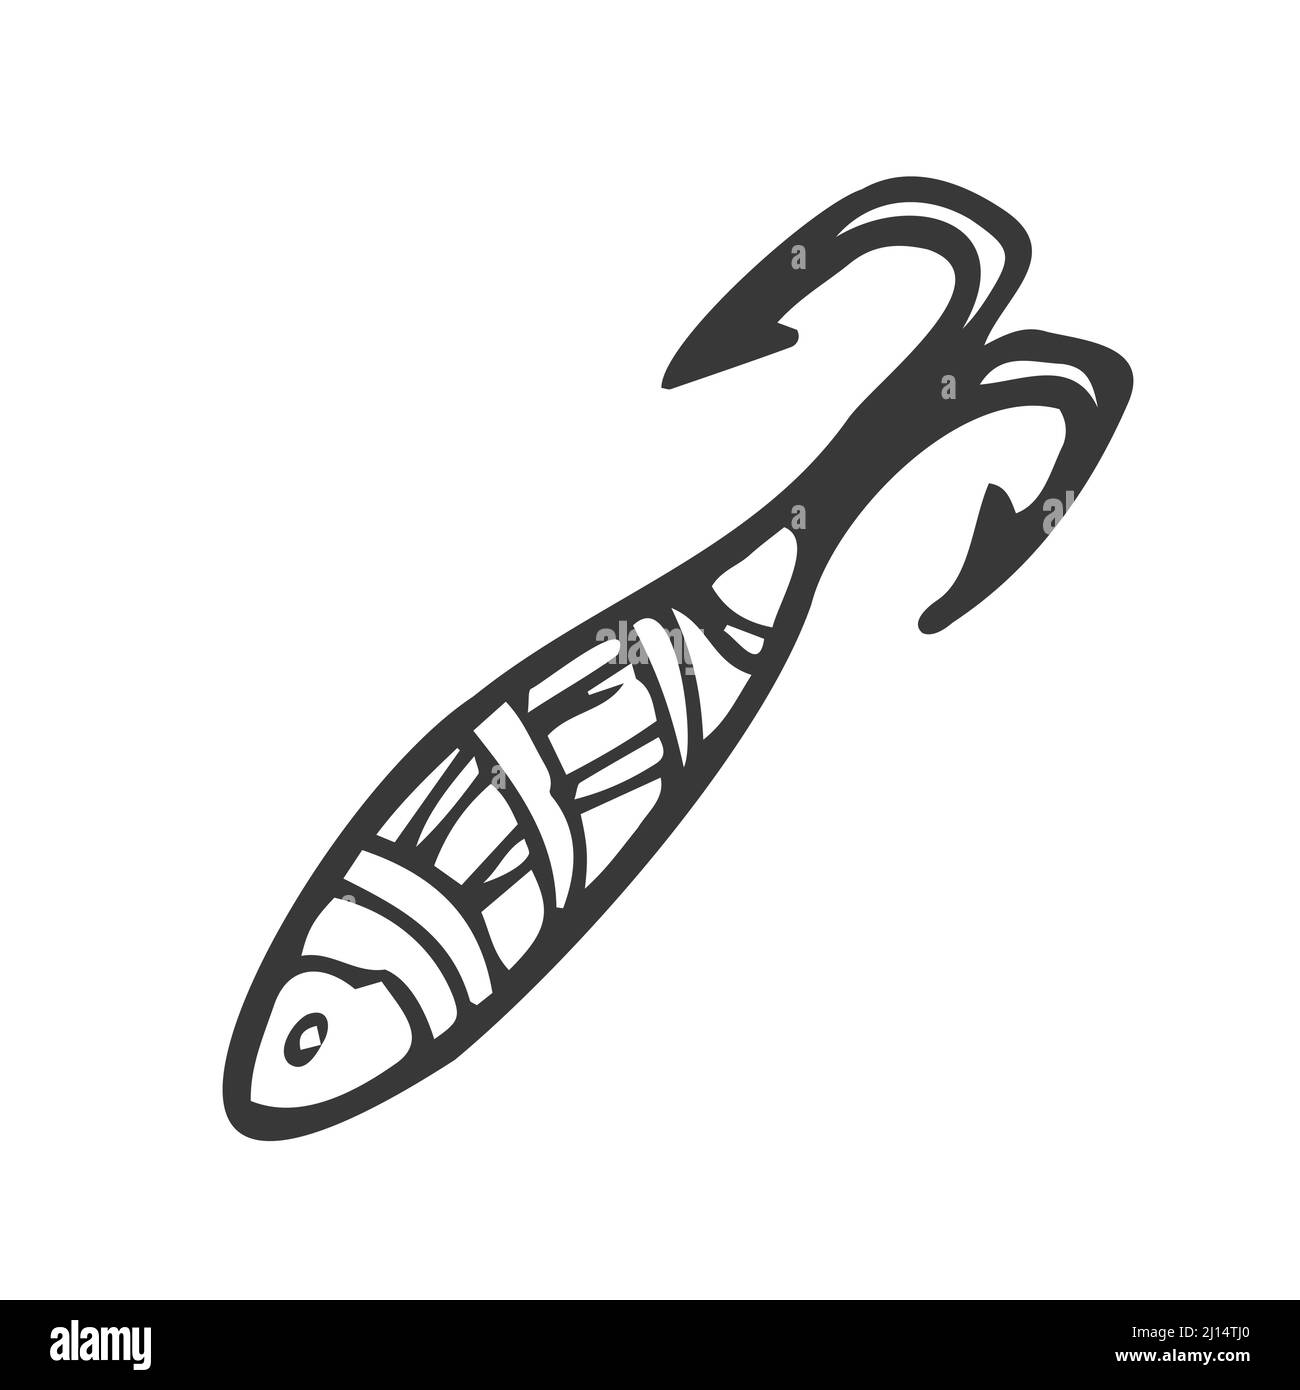 Doodle fishing lure. Abstract contemporary fishery baits of different sizes and shapes for angler. Colored hand drawn fisher accessories with hooks. Stock Vector